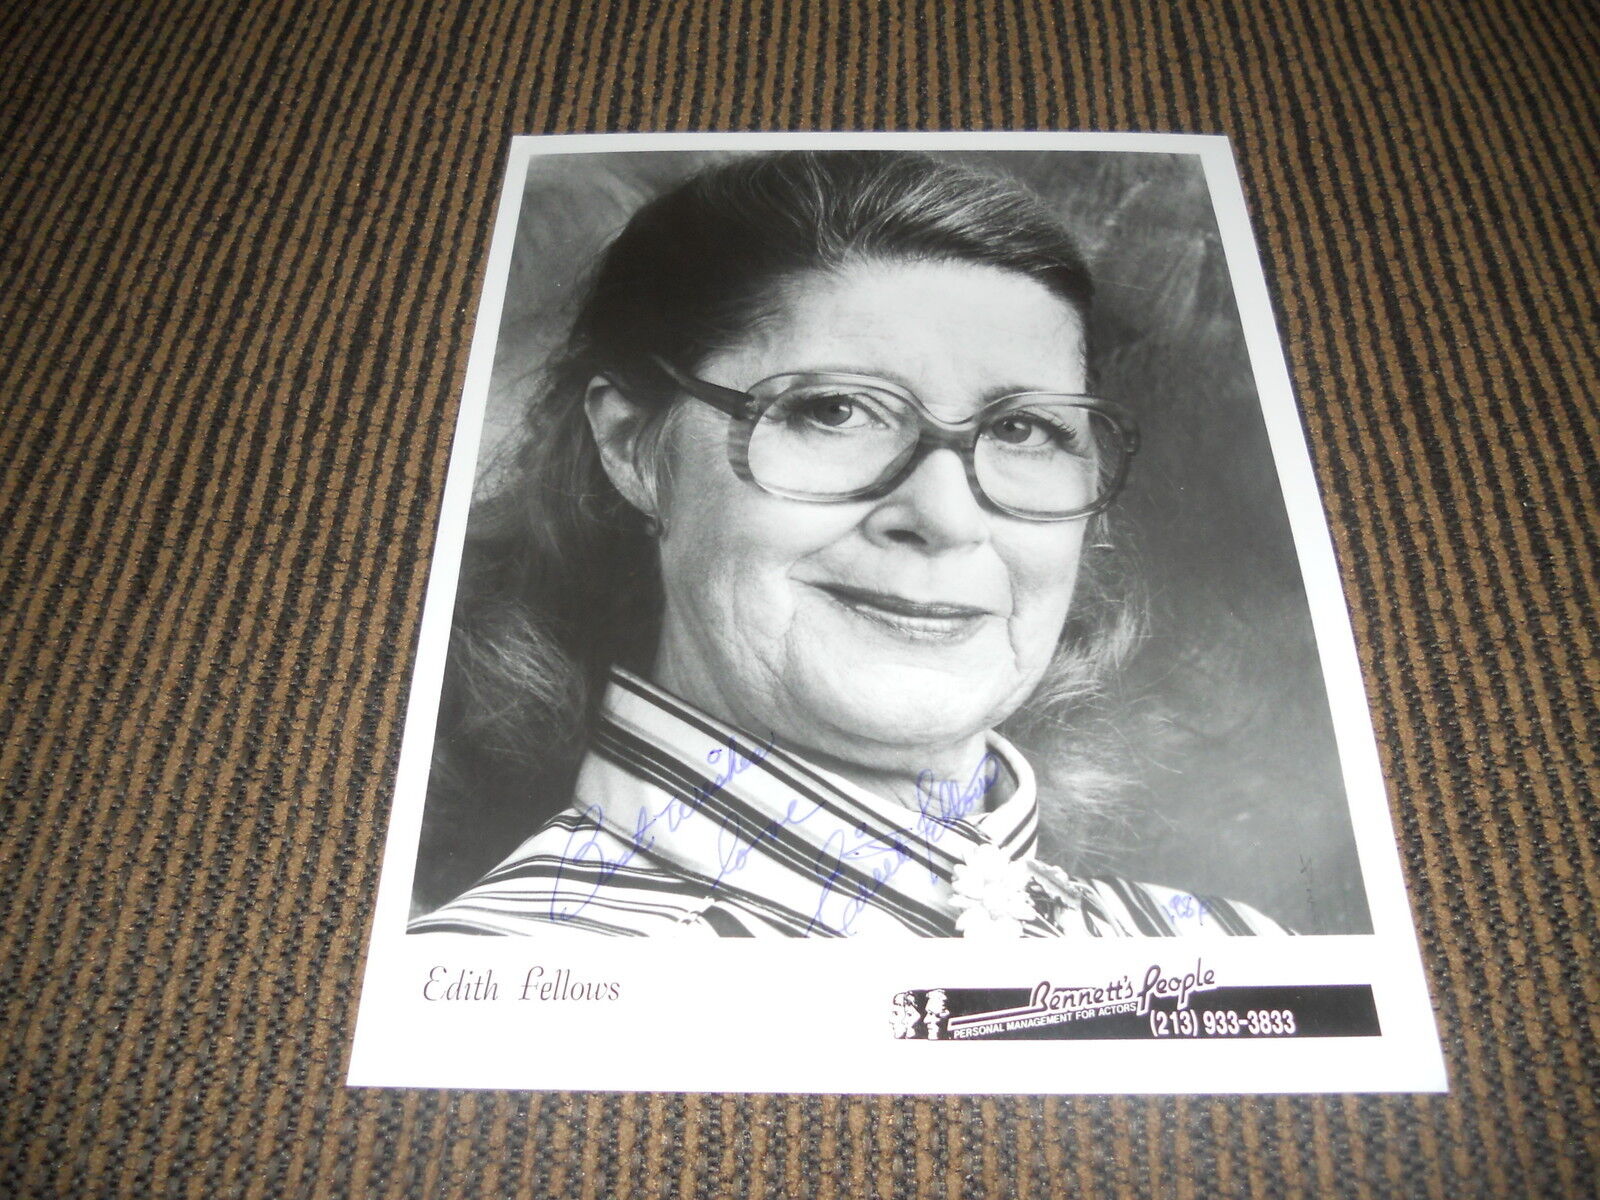 Edith Fellows Our Gang Vintage Signed Autographed 8x10 Photo Poster painting PSA Guaranteed